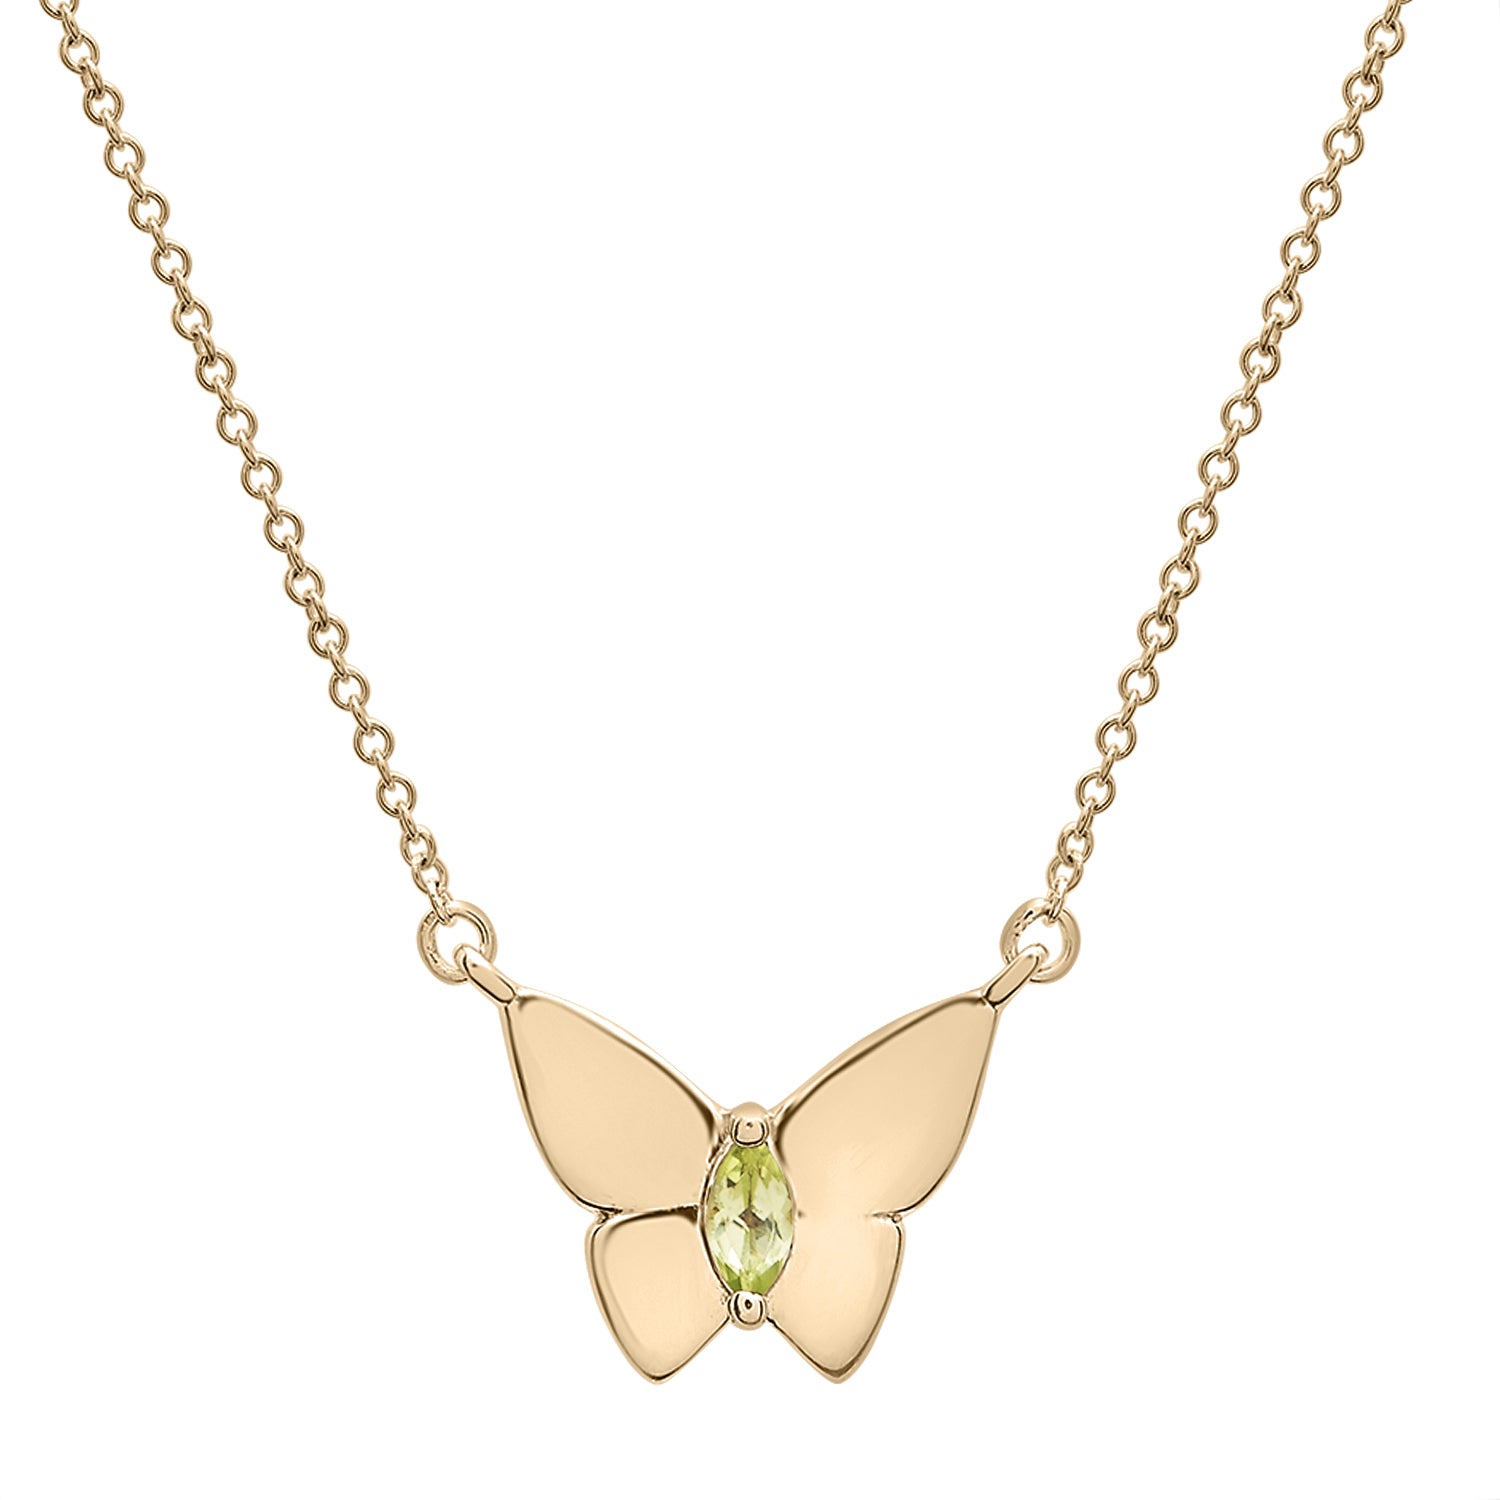 Light Yellow Stone Butterfly Birthstone Necklace in Gold chain